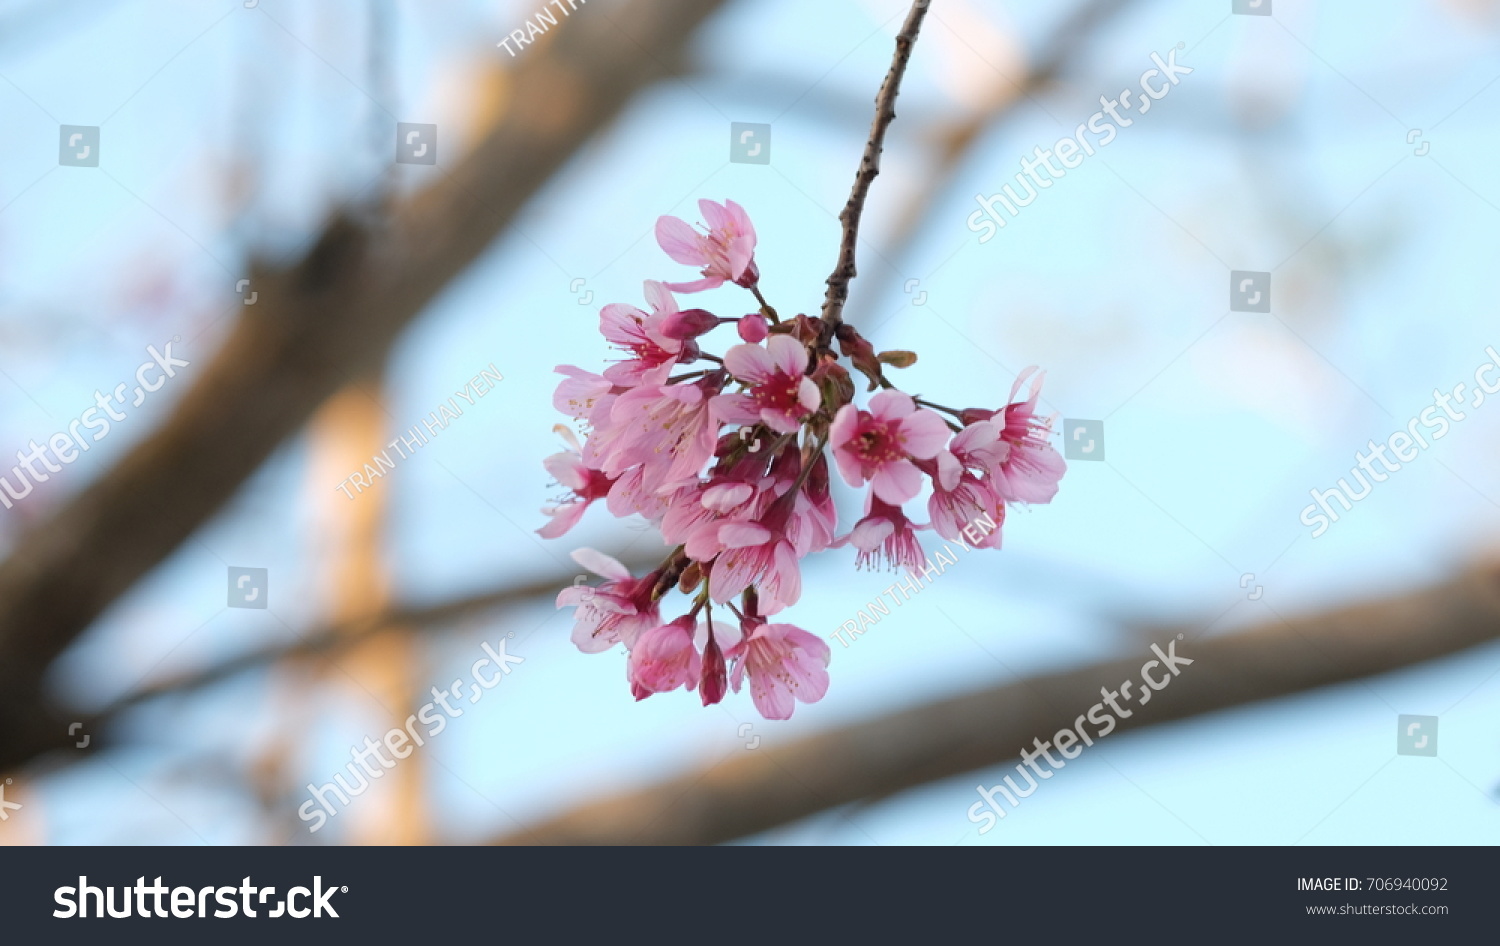 Pink wild Himalayan cherry flower blooming in blue sky in Dalat city, Vietnam. Its Vietnamese name is Mai anh dao. It is a deciduous cherry tree found in East Asia, South Asia and Southeast Asia.  #706940092